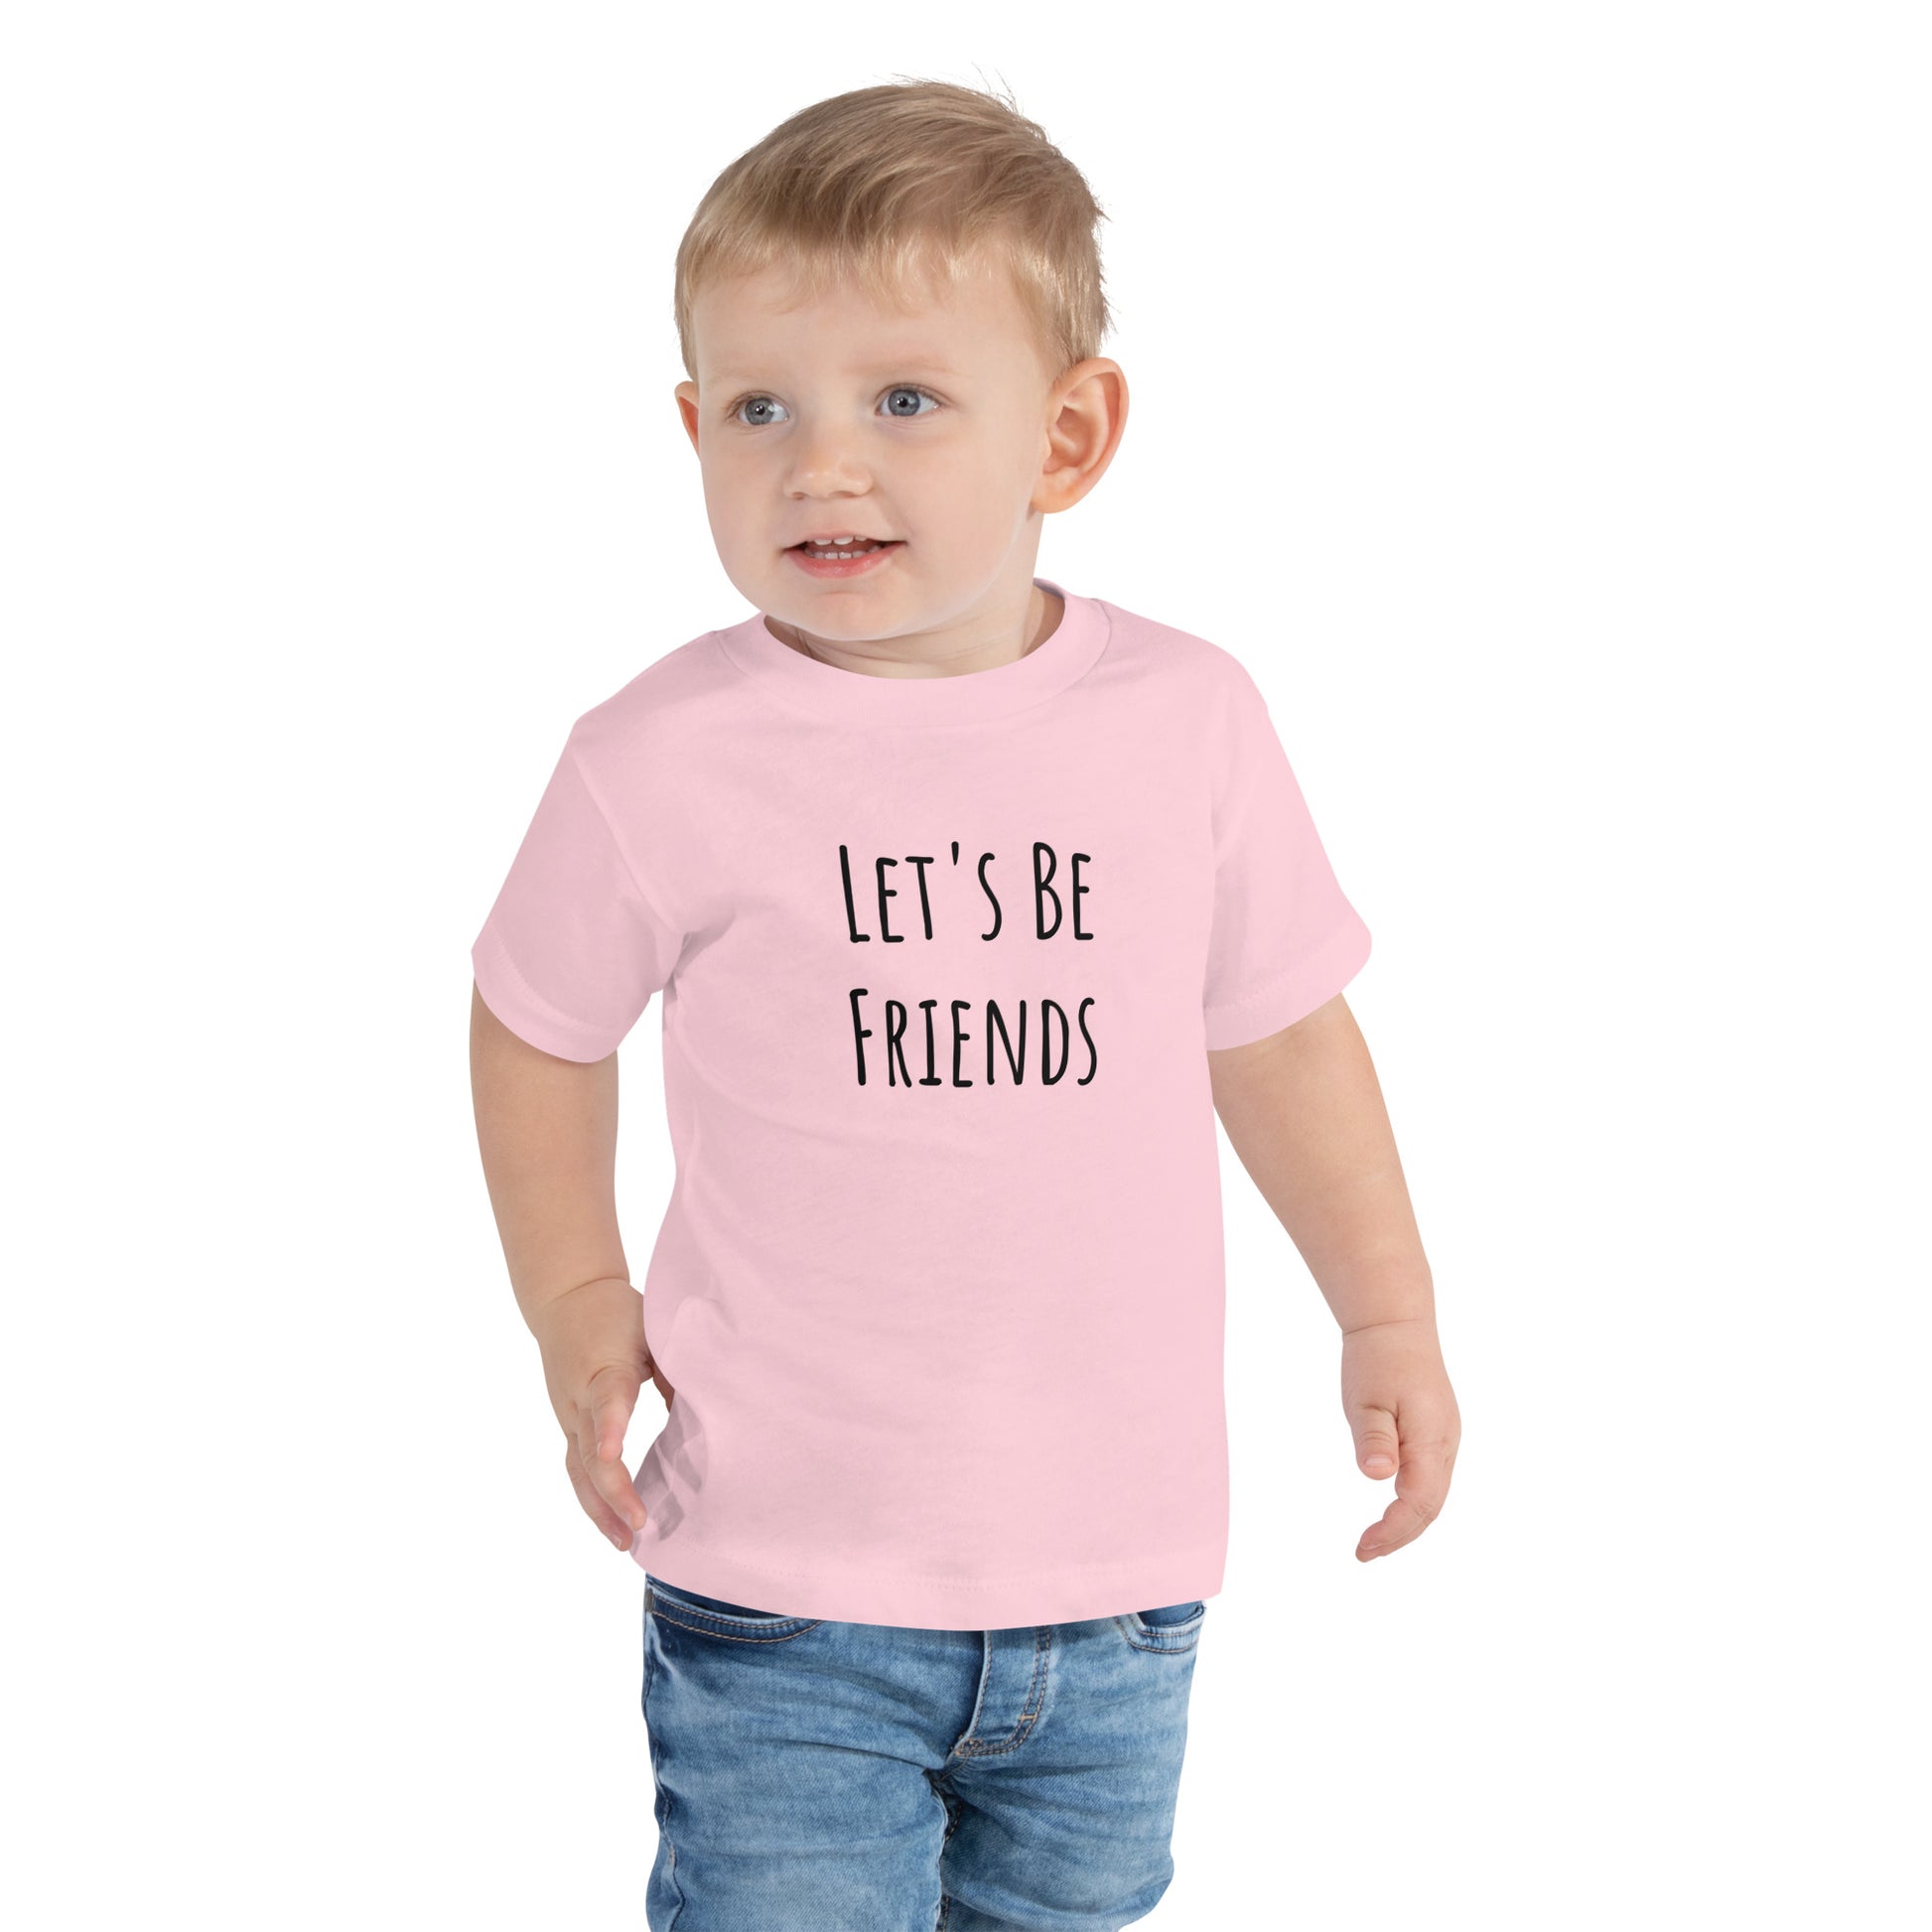 Let's Be Friends - Toddler Tee – The Culture of Kindness